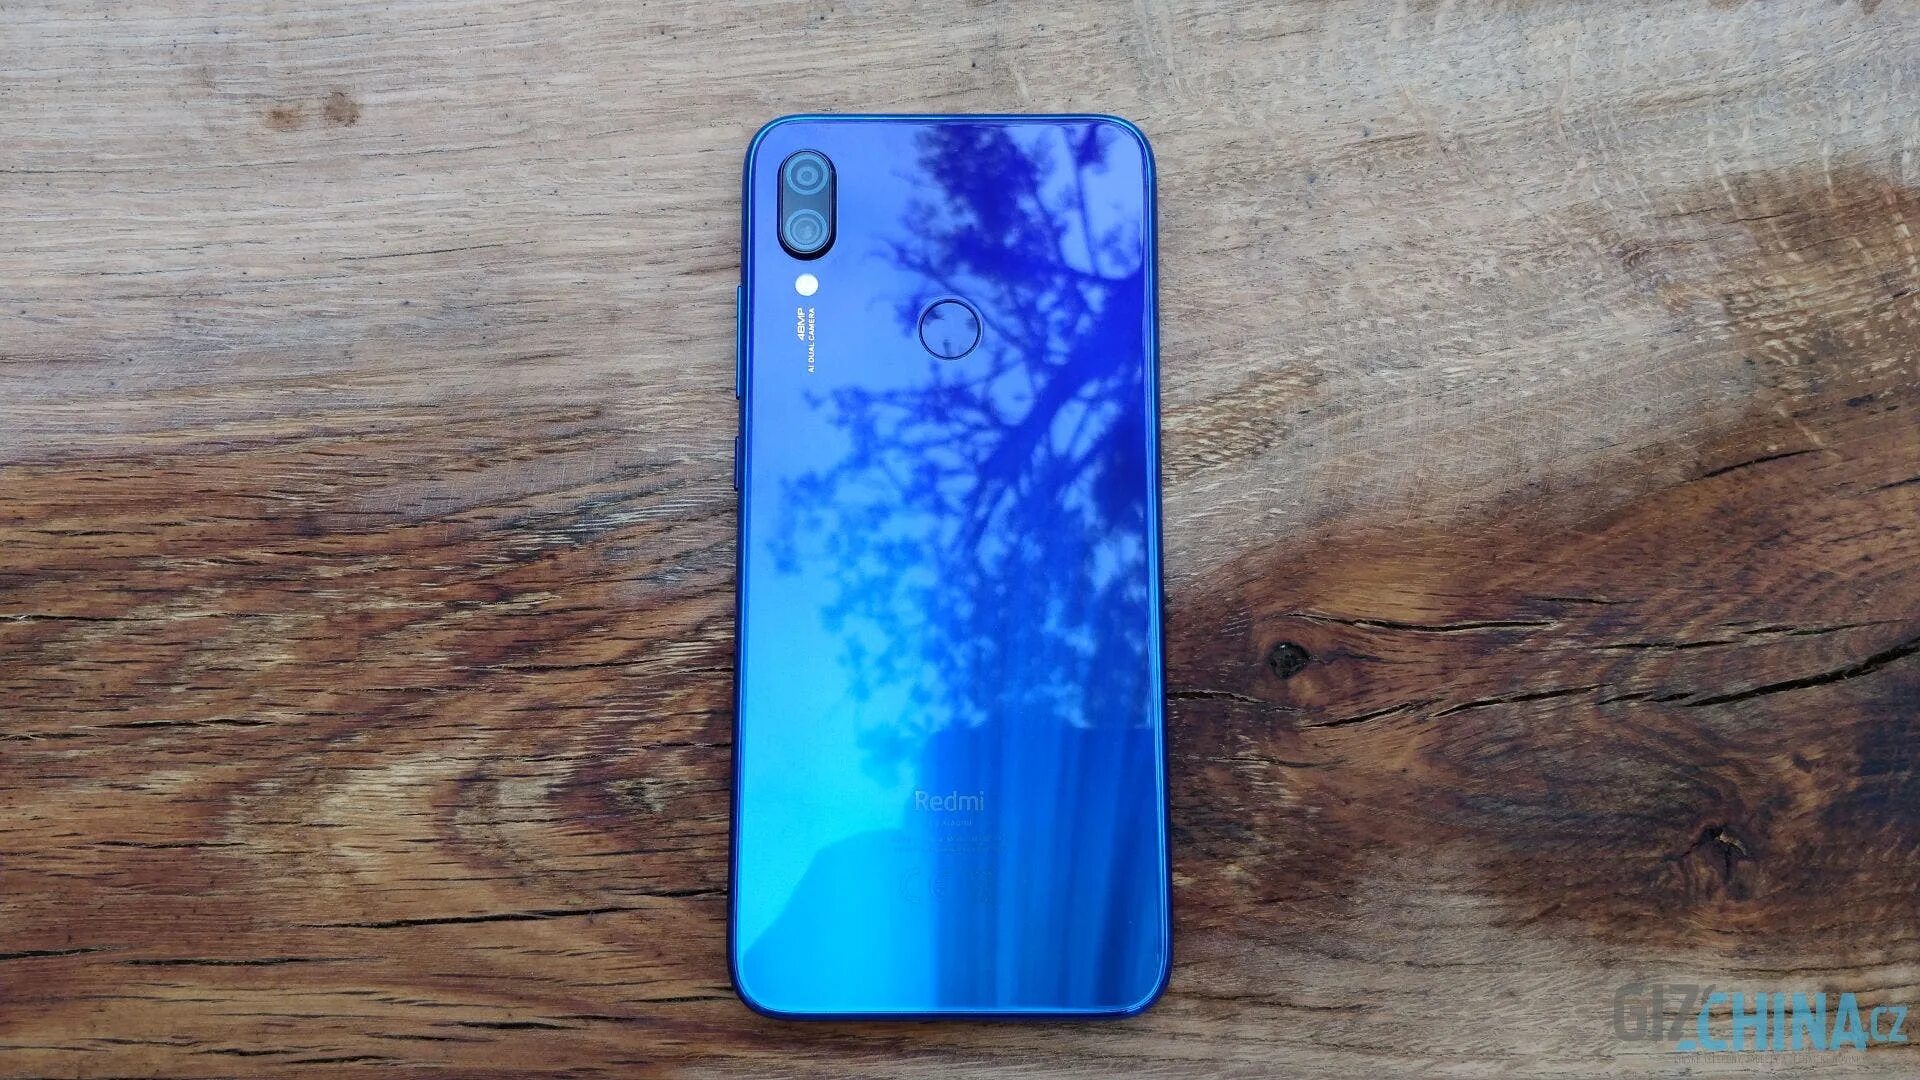 Xiaomi redmi note 7 2. Xiaomi Redmi Note 7. Xiaomi Redmi Note 7 Note. Xiaomi Redmi Note 7 Xiaomi. Xiaomi Redmi Note 7 Blue.